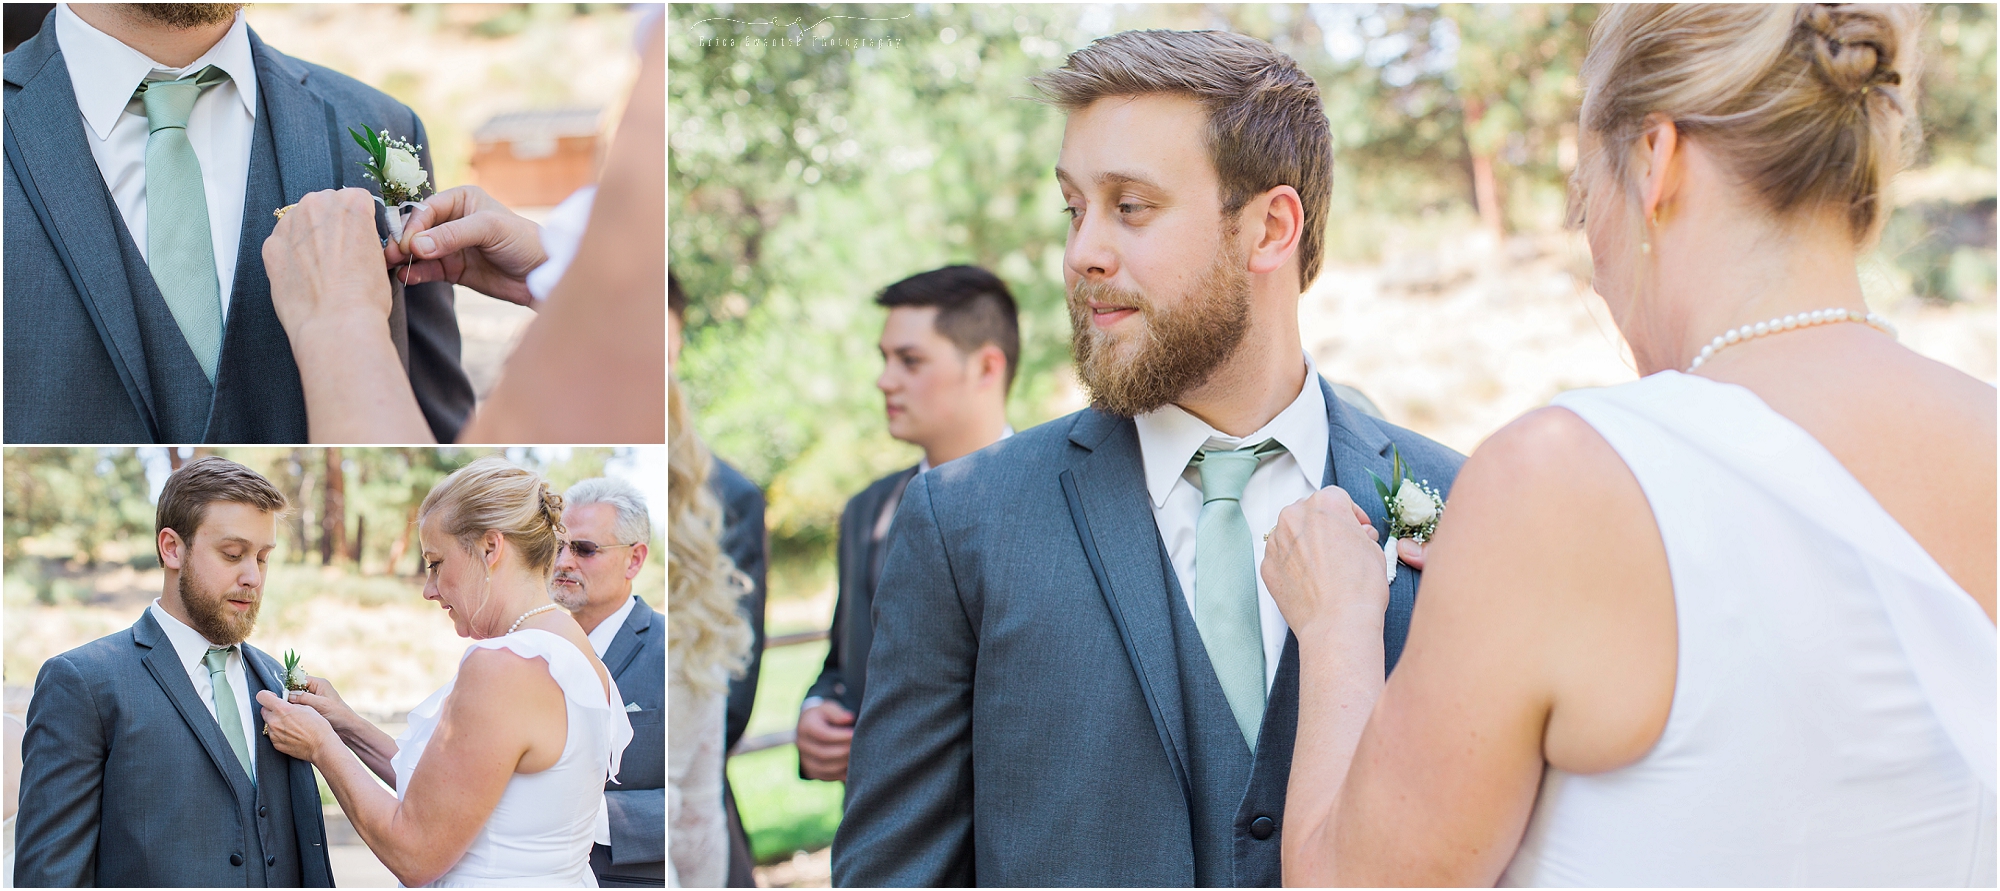 A groom's mother pins his lovely boutonneire created by Summer Robbins Flowers in Bend, OR. | Erica Swantek Photography